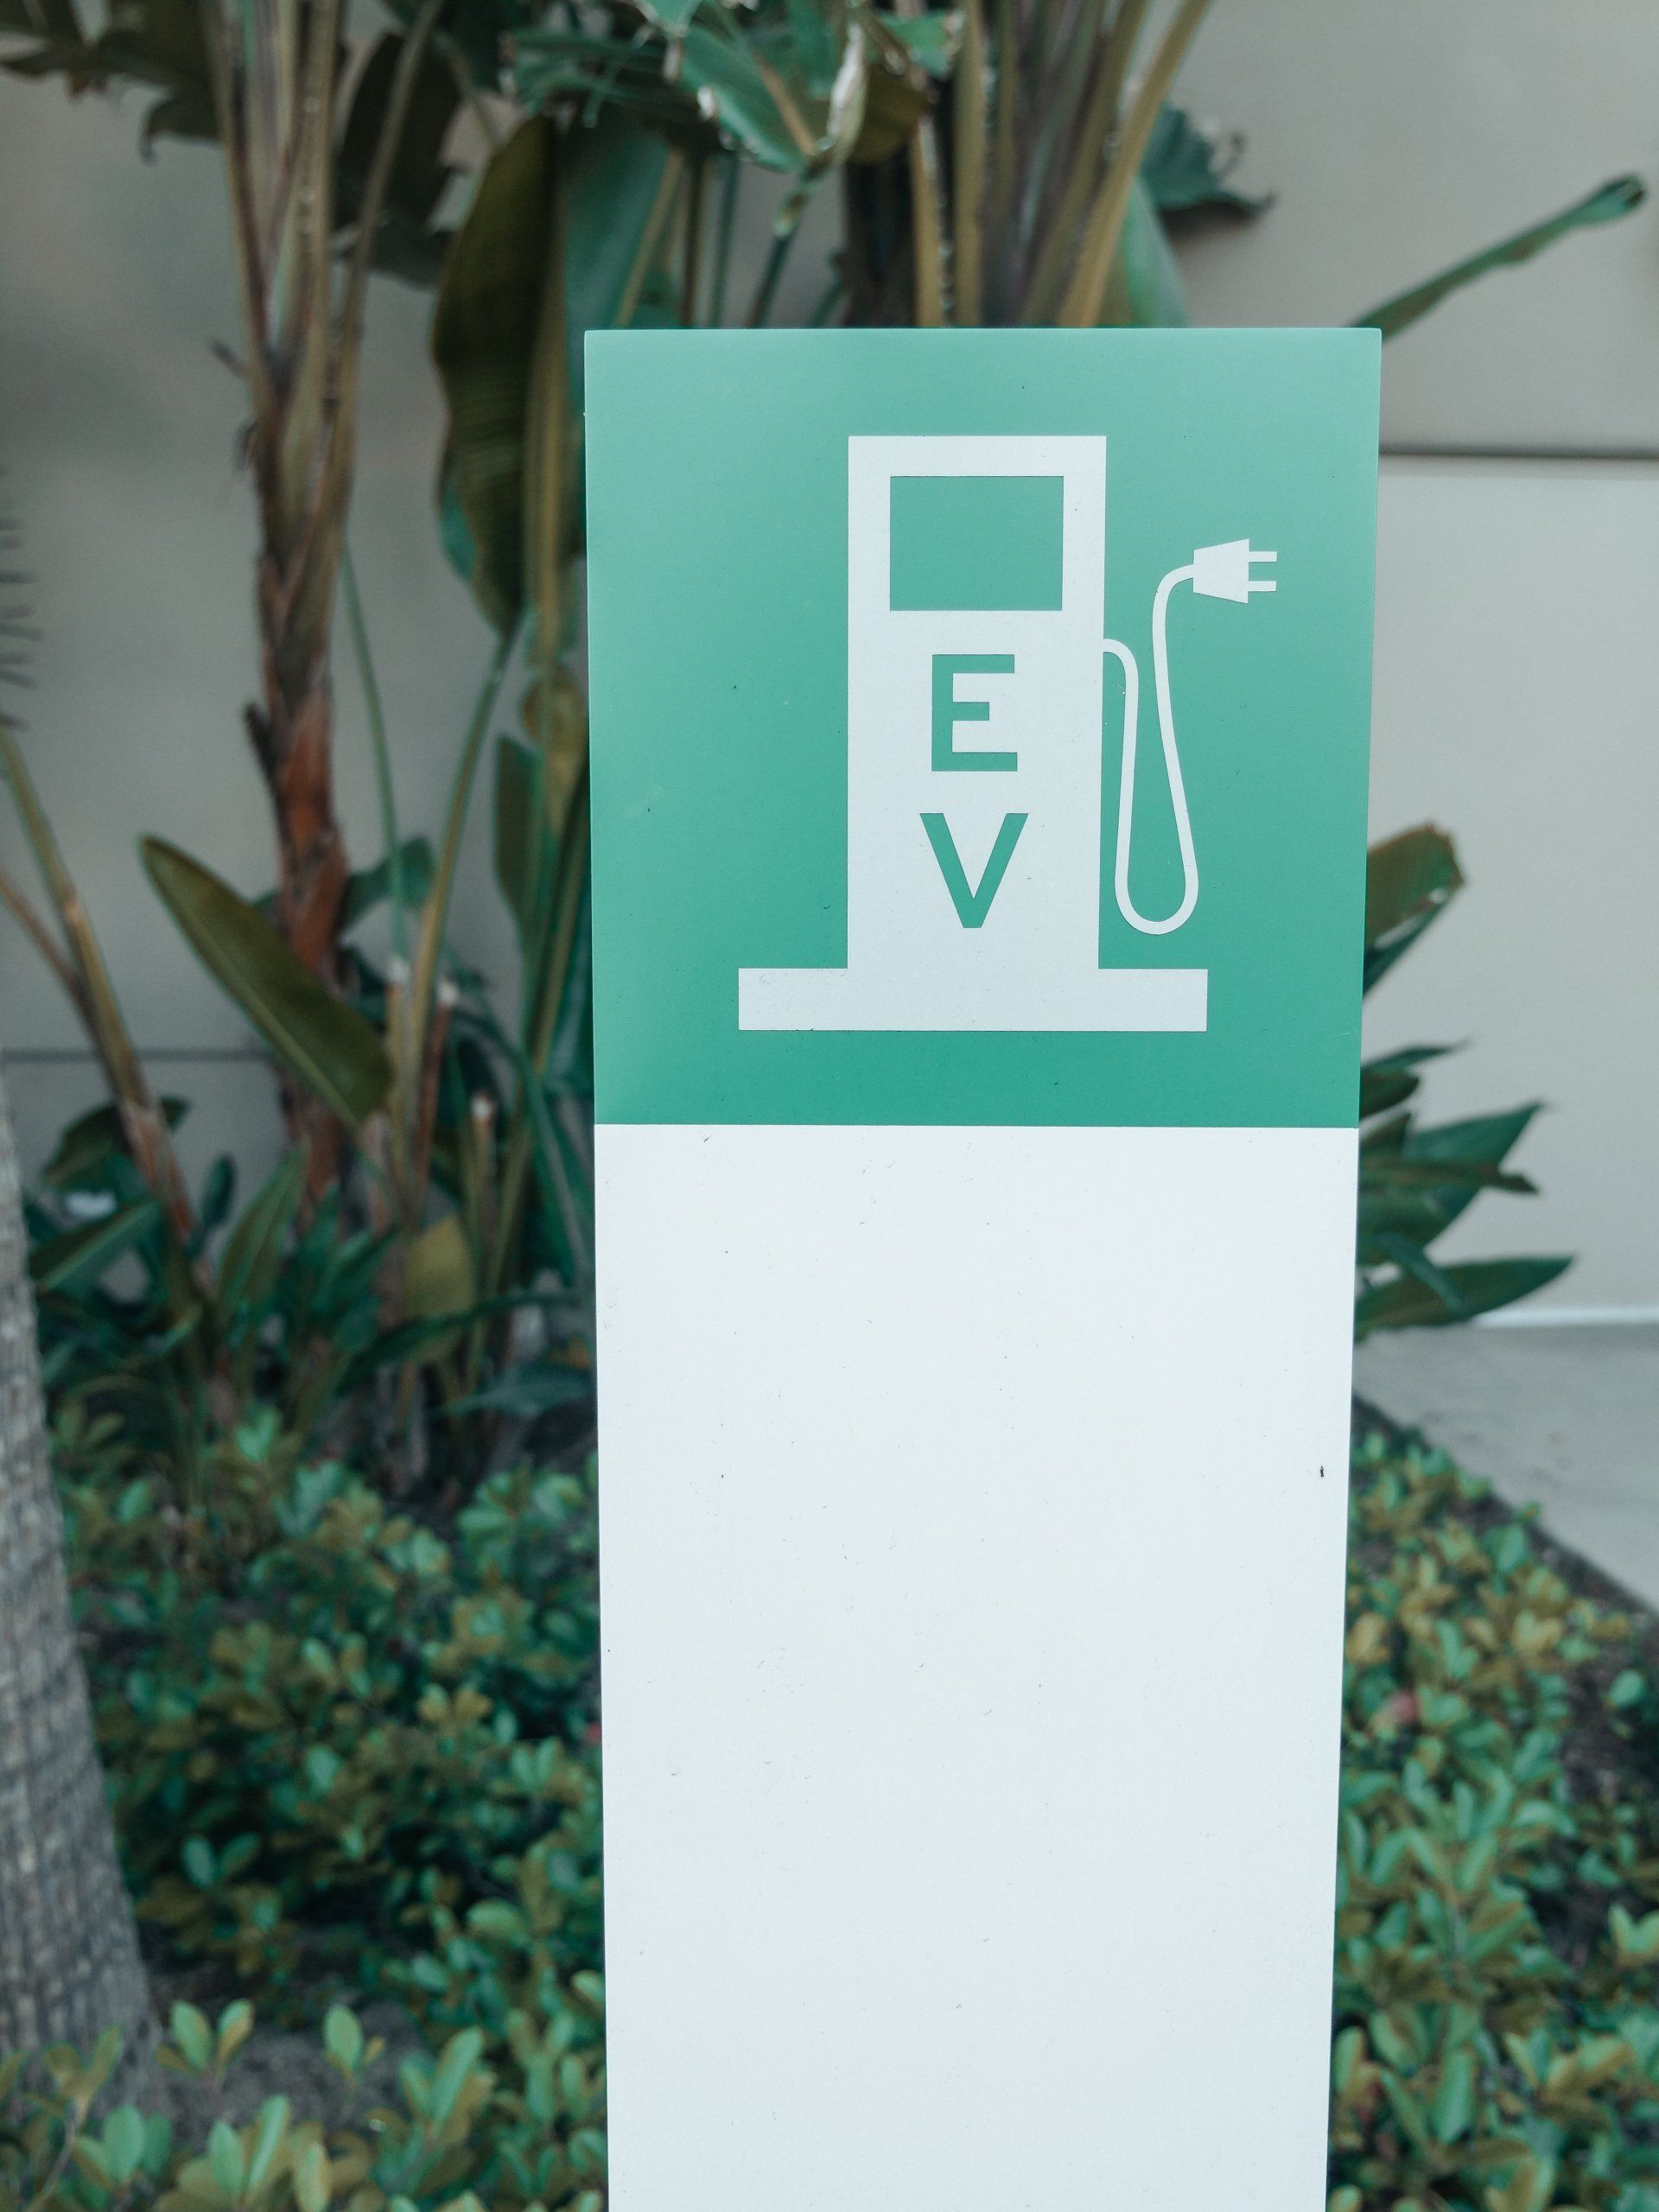 A green and white sign for an EV charging station